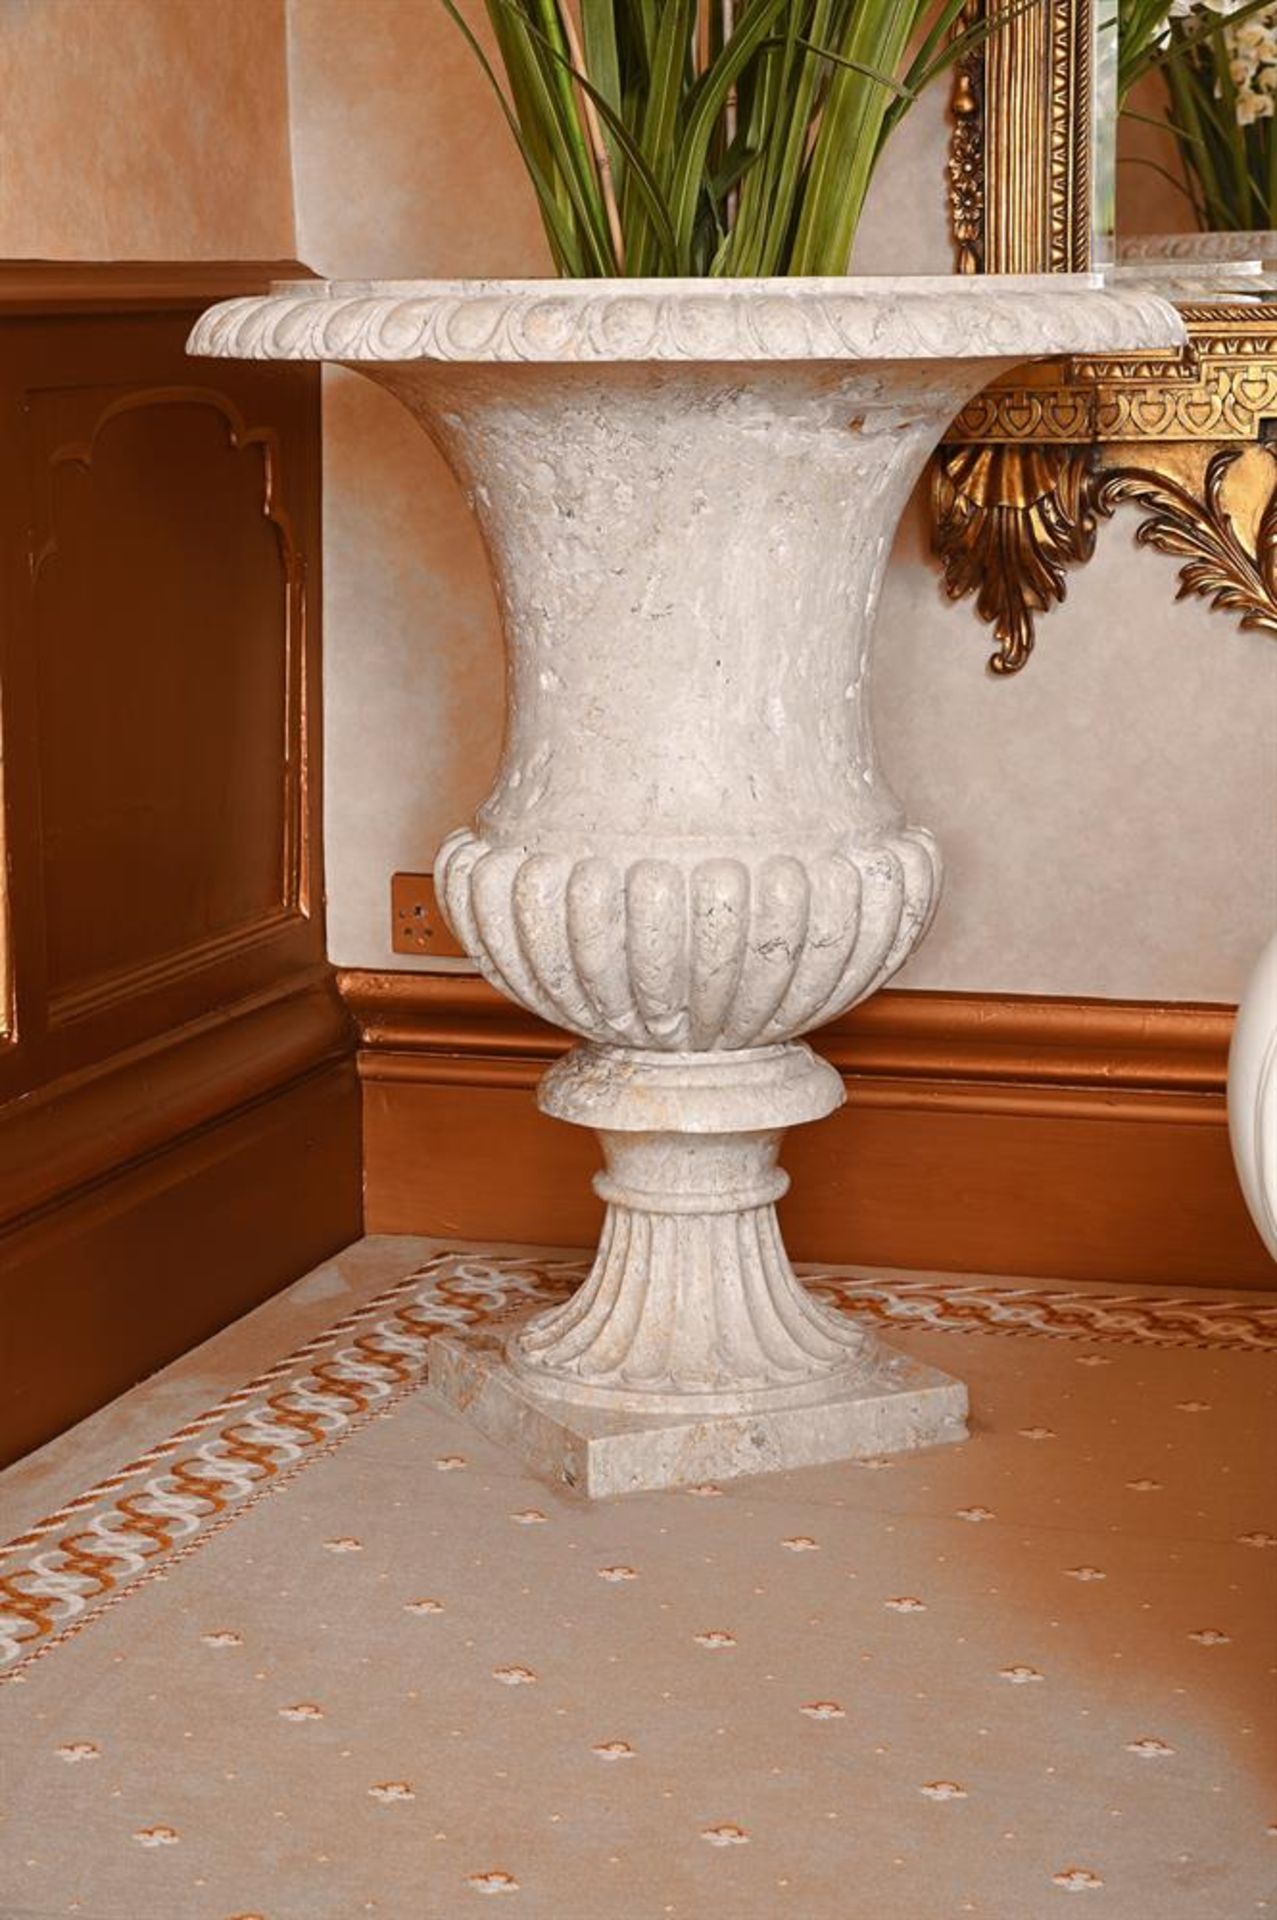 A PAIR OF CARVED MARBLE URNS ON PLINTHS IN NEO-CLASSICAL TASTE - Image 3 of 4